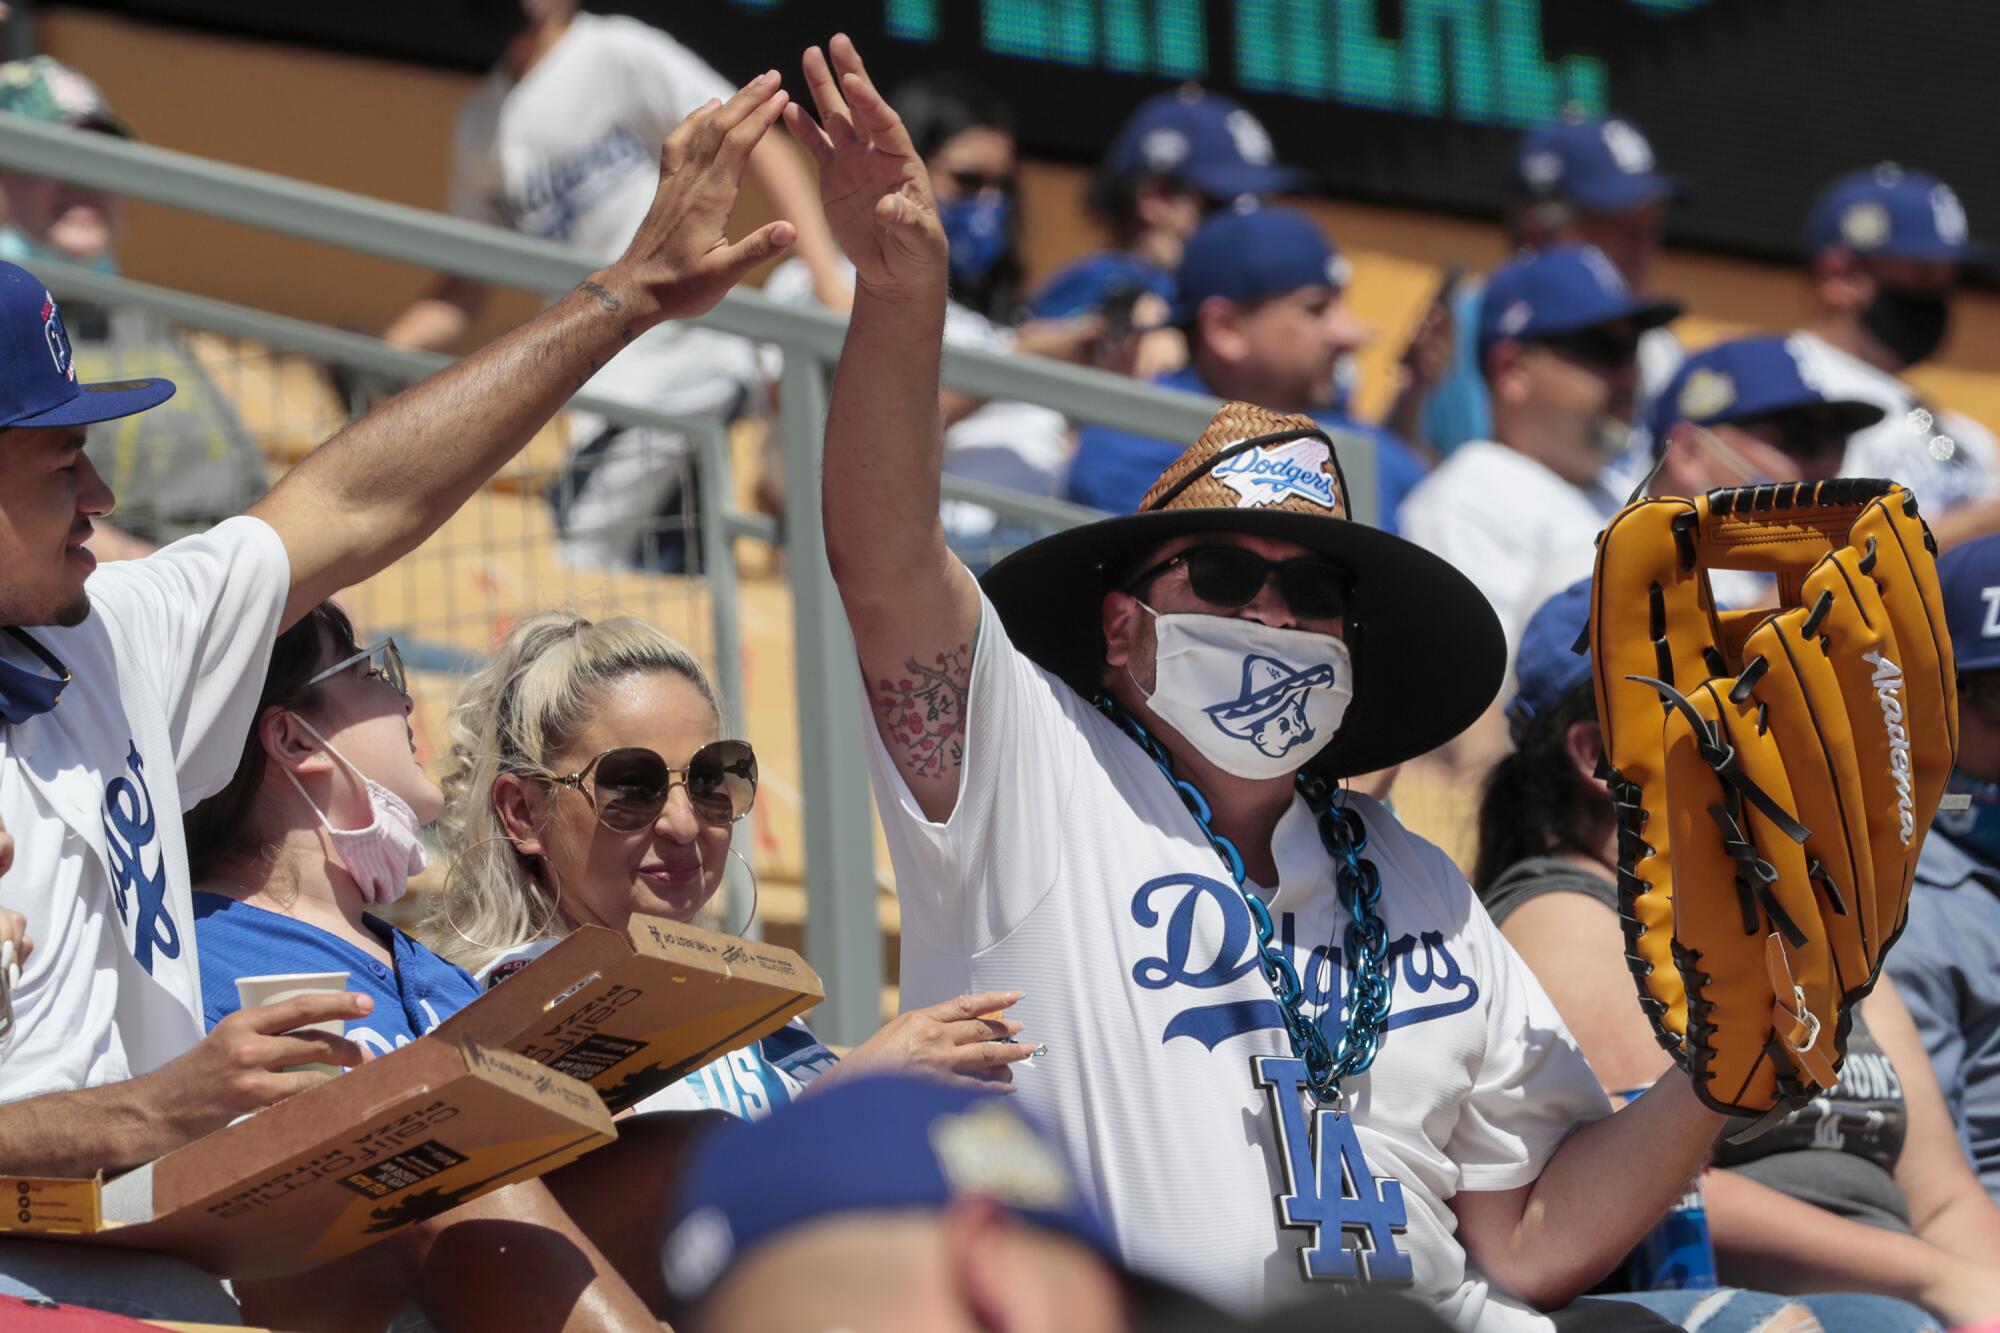 A fan with an extra-large glove is congratulated after catching a ball in the left-field pavilion at Dodger Stadium.